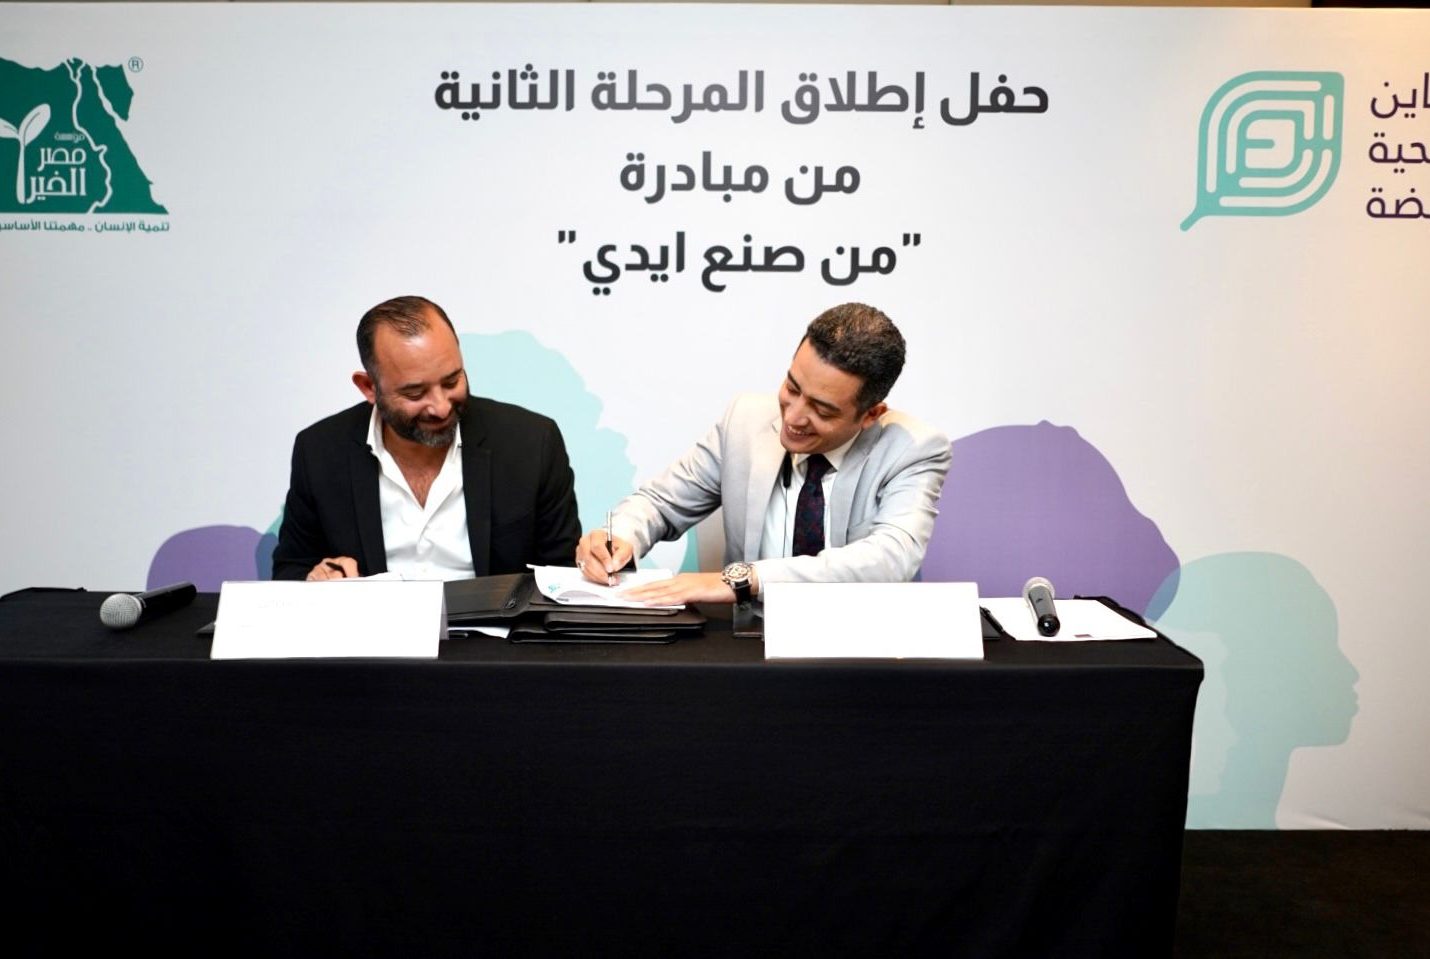 FHH, Misr El Kheir team up for 2nd phase of “Passionately Handmade” initiative